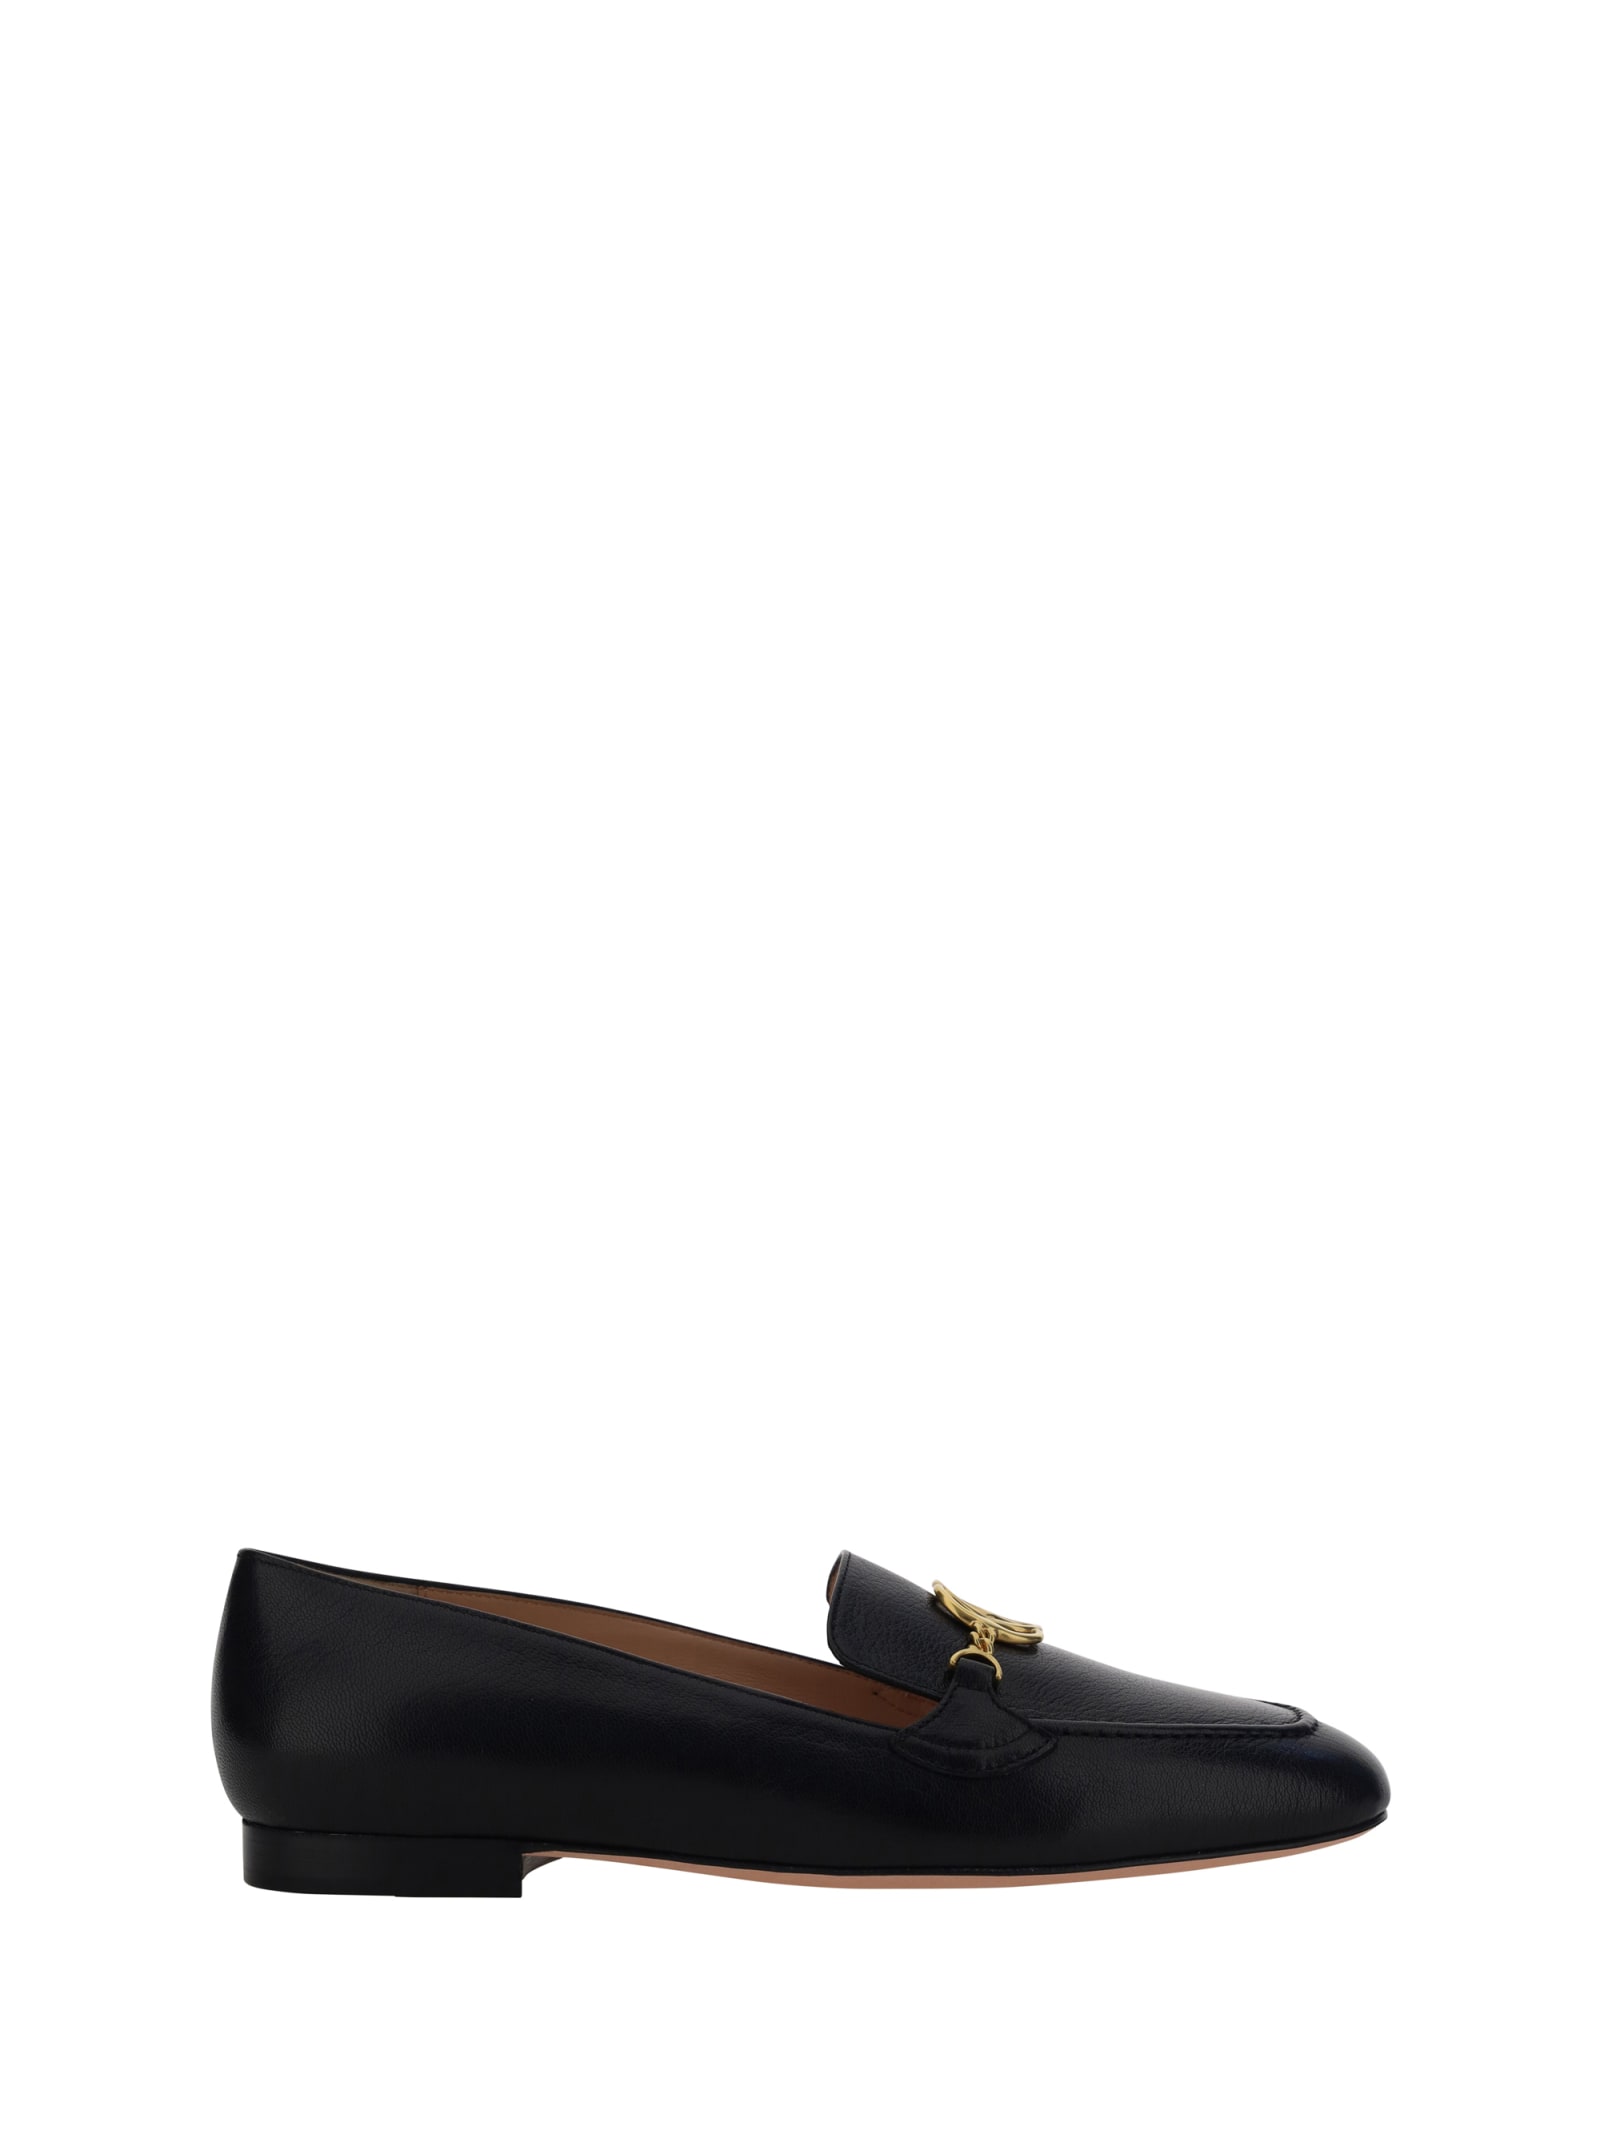 Bally Loafers In Black